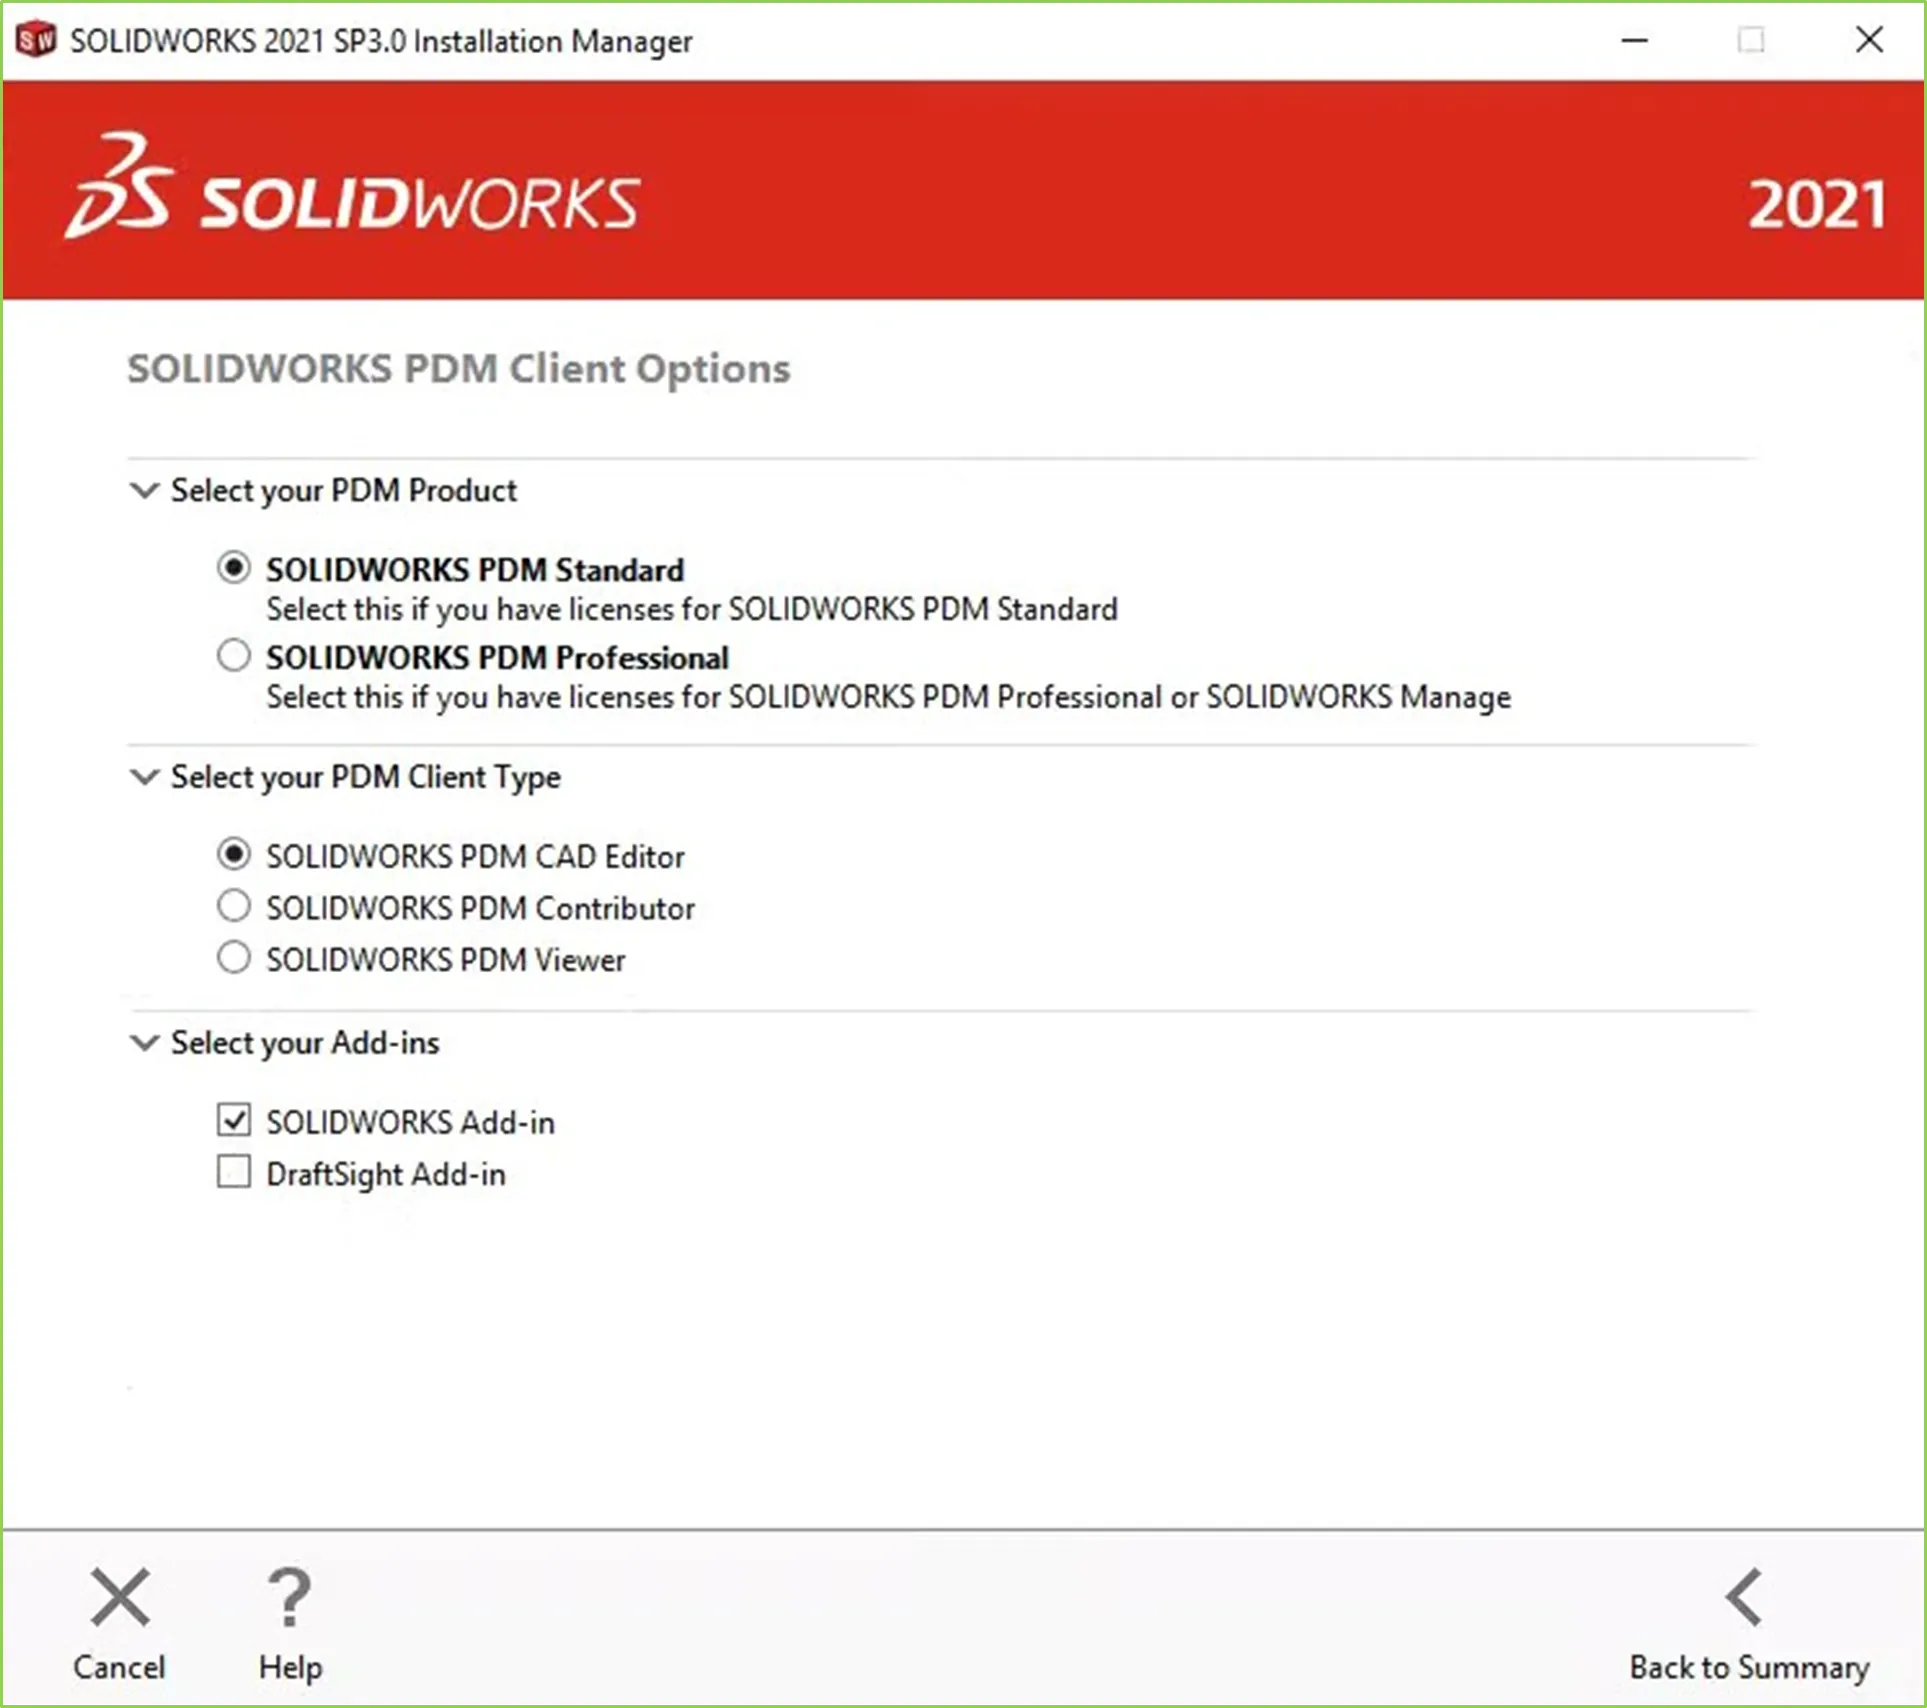 Installation for SOLIDWORKS PDM CAD Editors